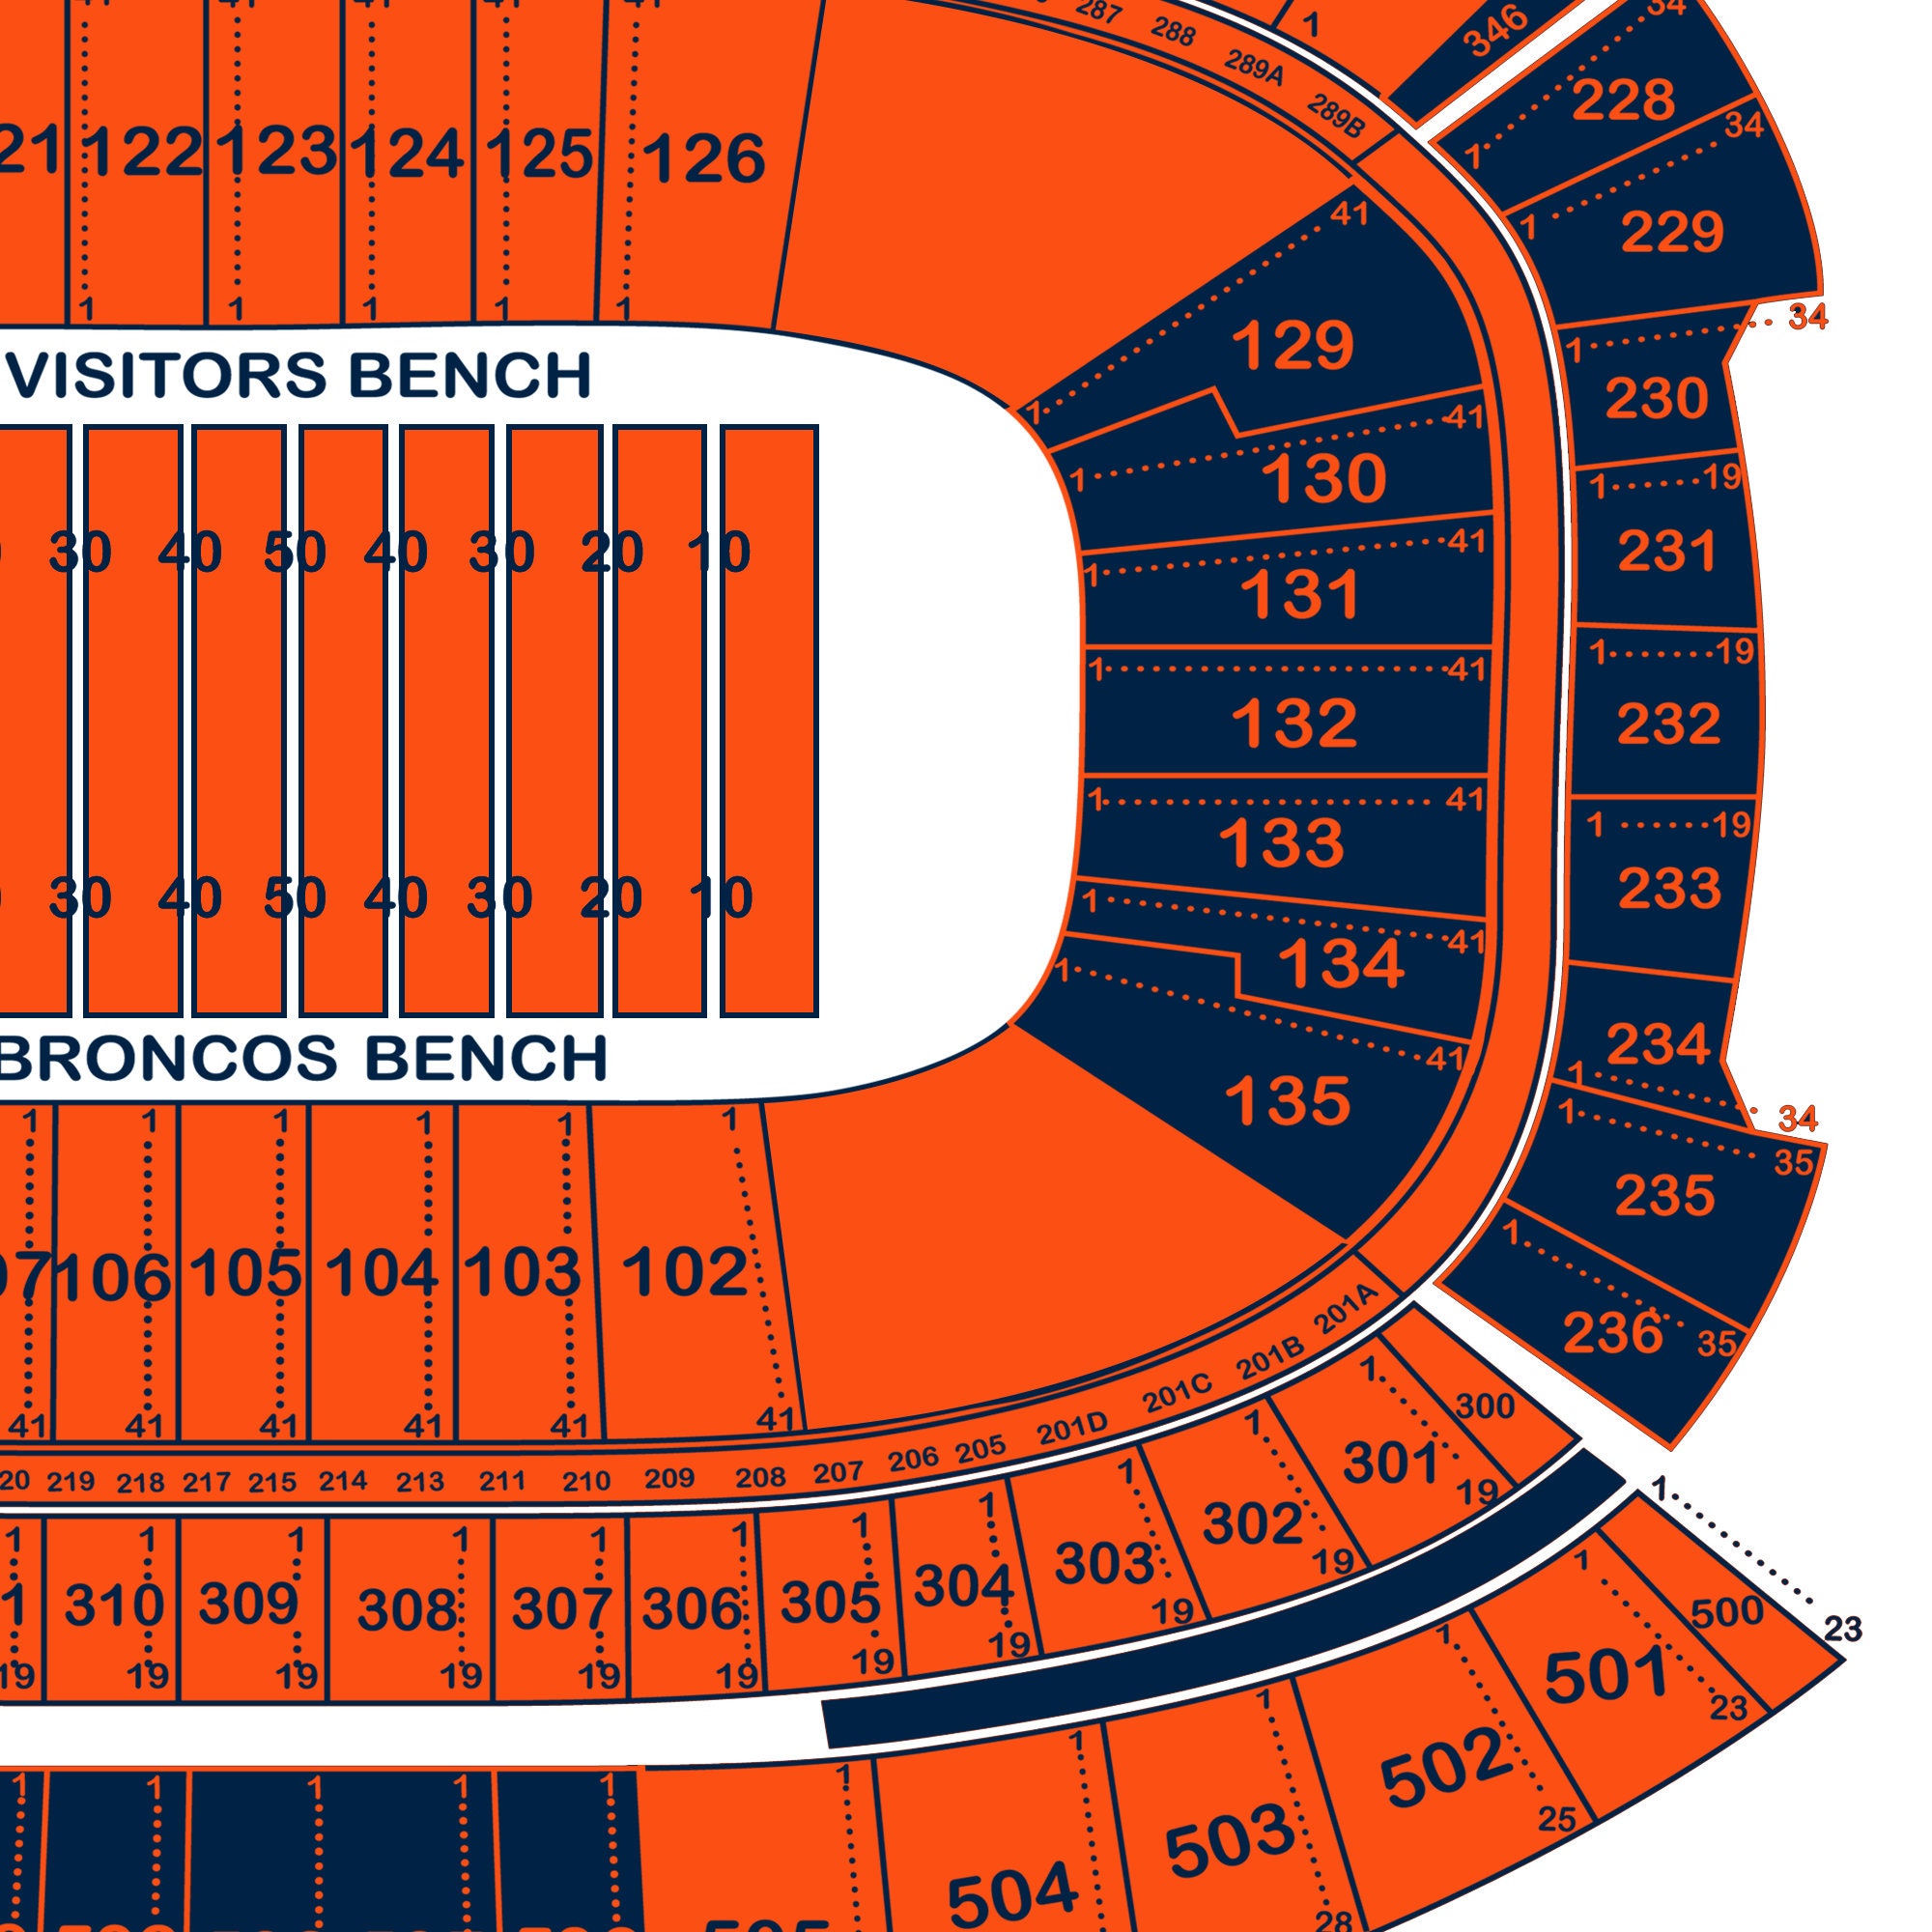 Vintage Style Print of Mile High Stadium Seating Chart on Photo Paper